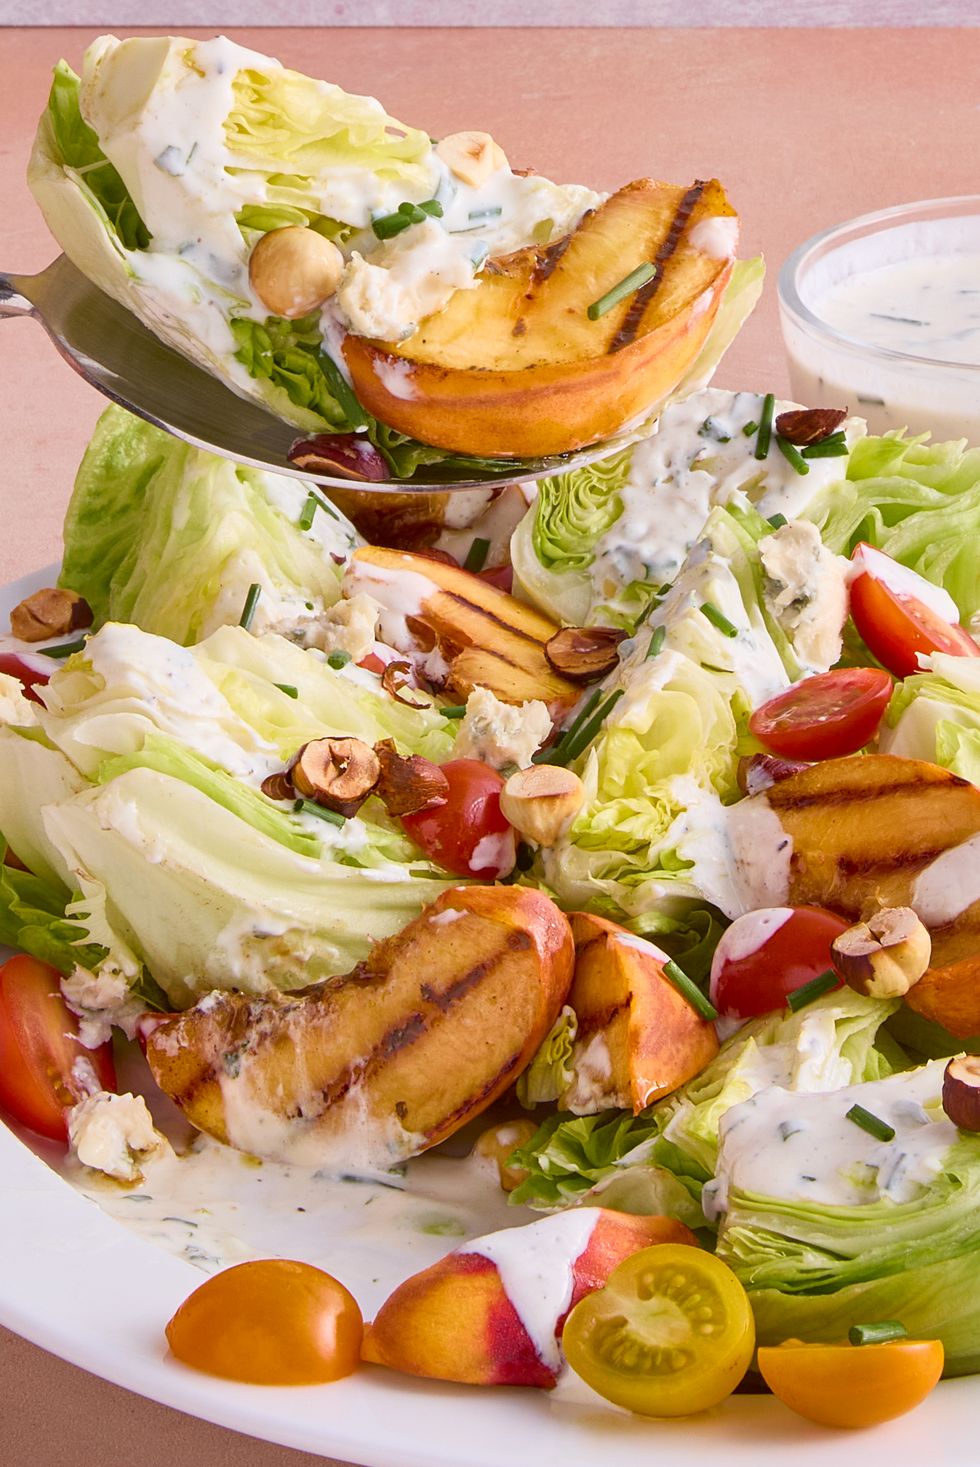 lettuce topped with grilled peach slices, tomatoes, toasted hazelnuts and creamy buttermilk dressing